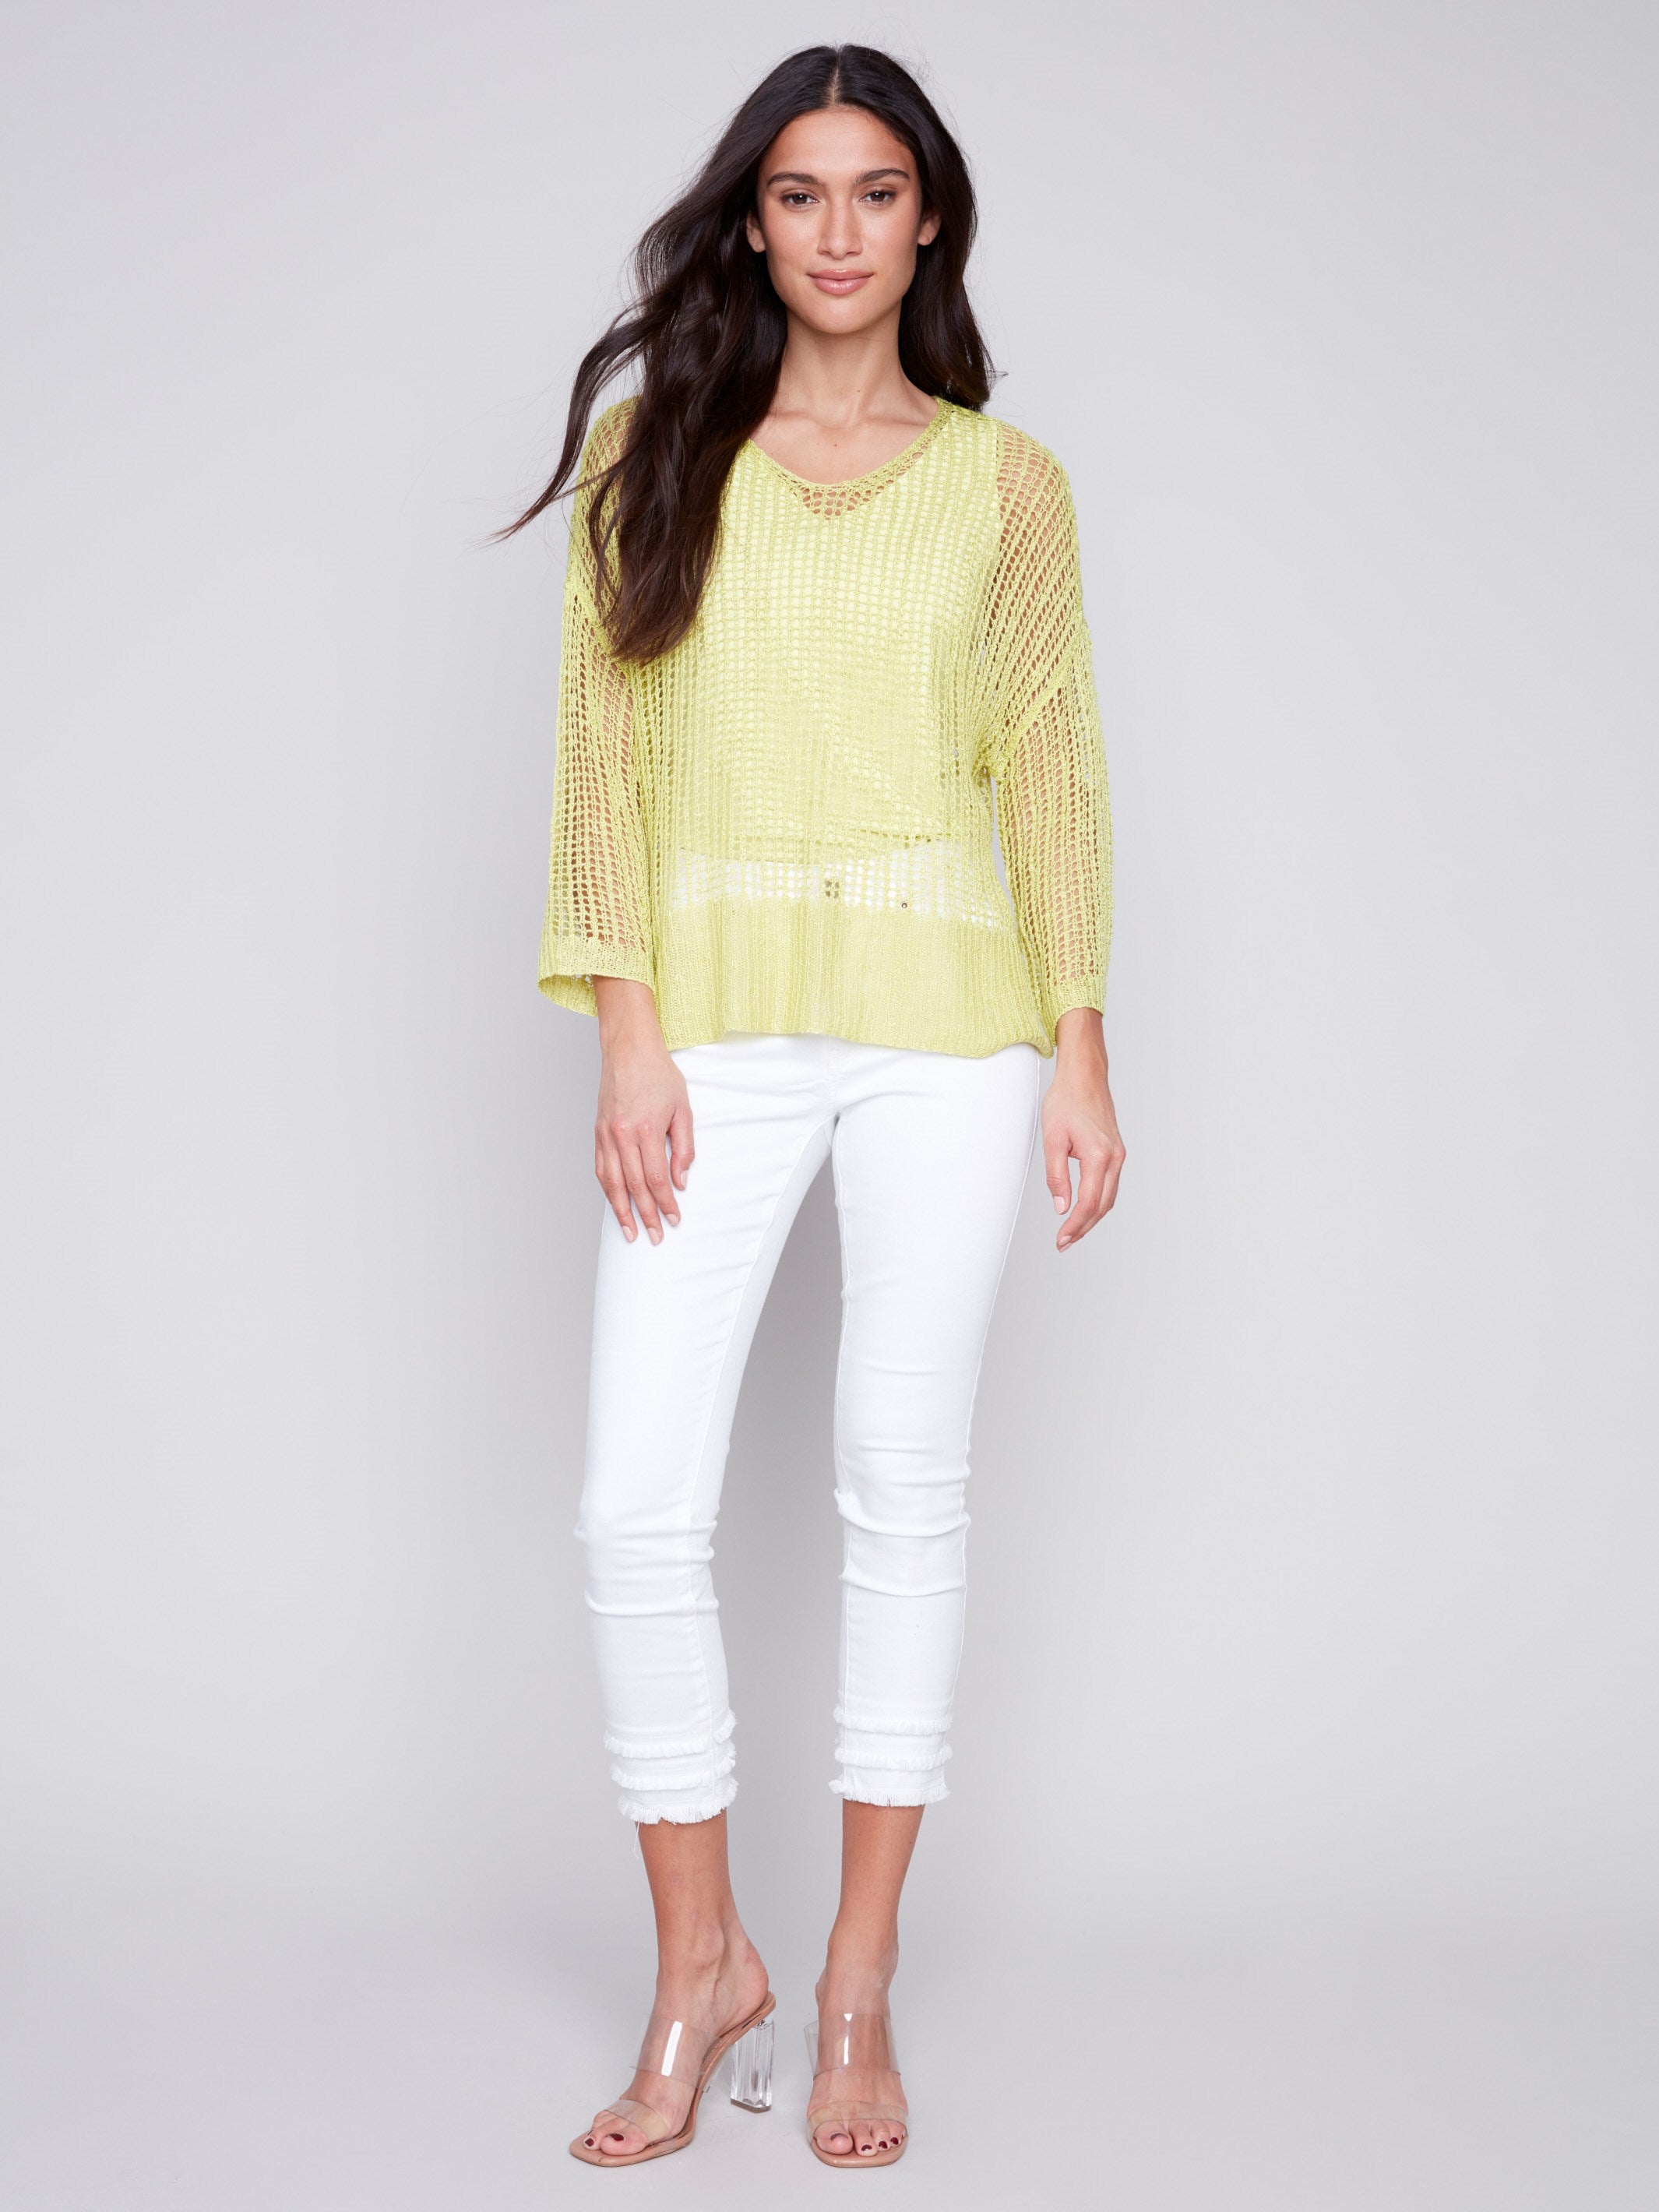 Fishnet Crochet Sweater - Anise - Charlie B Collection Canada - Image 3